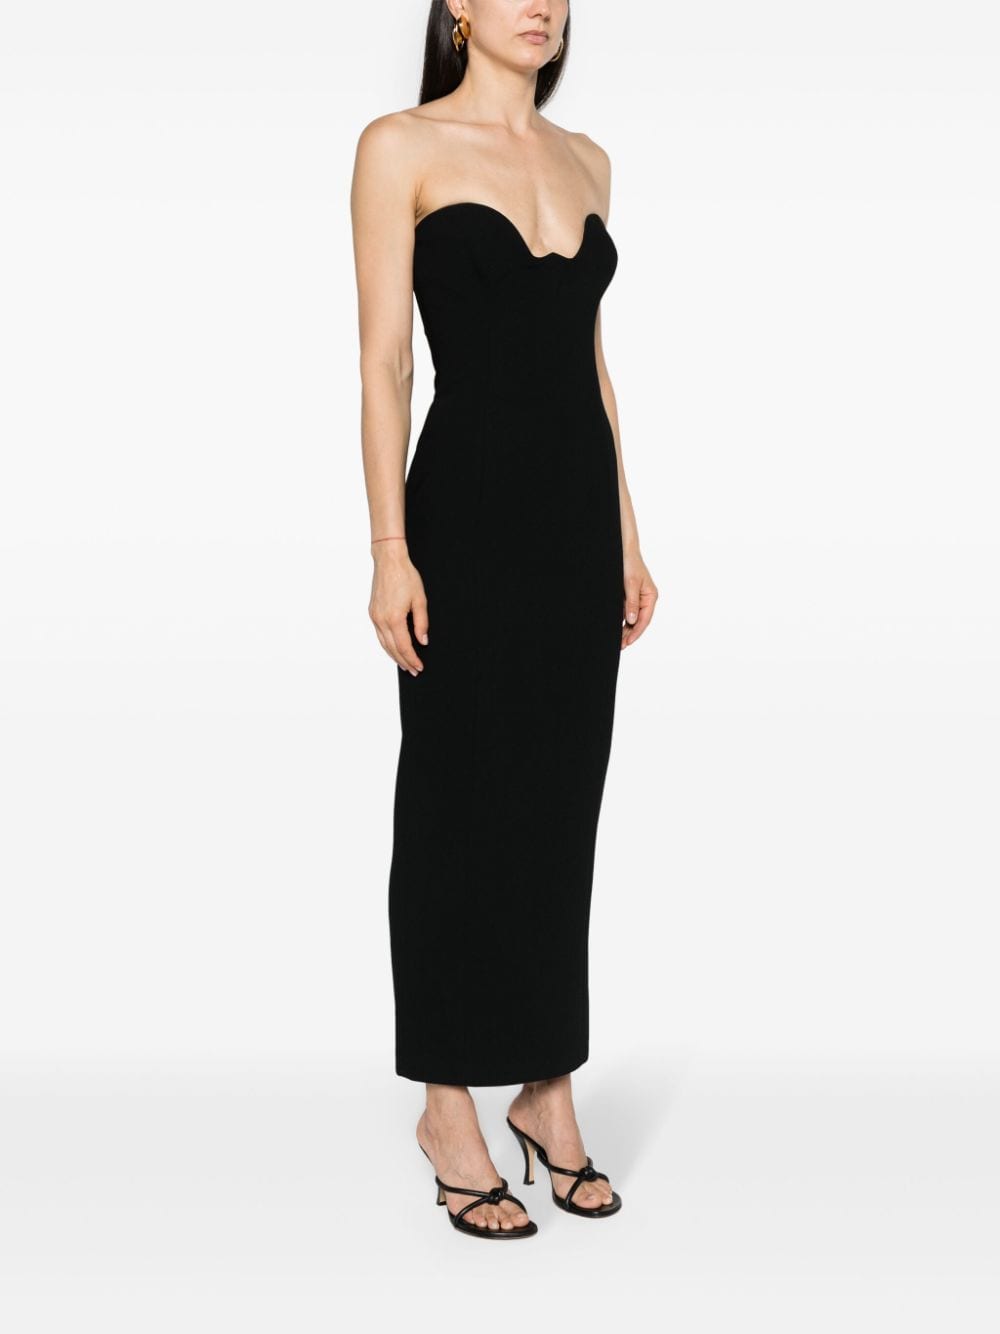 Lilith strapless dress